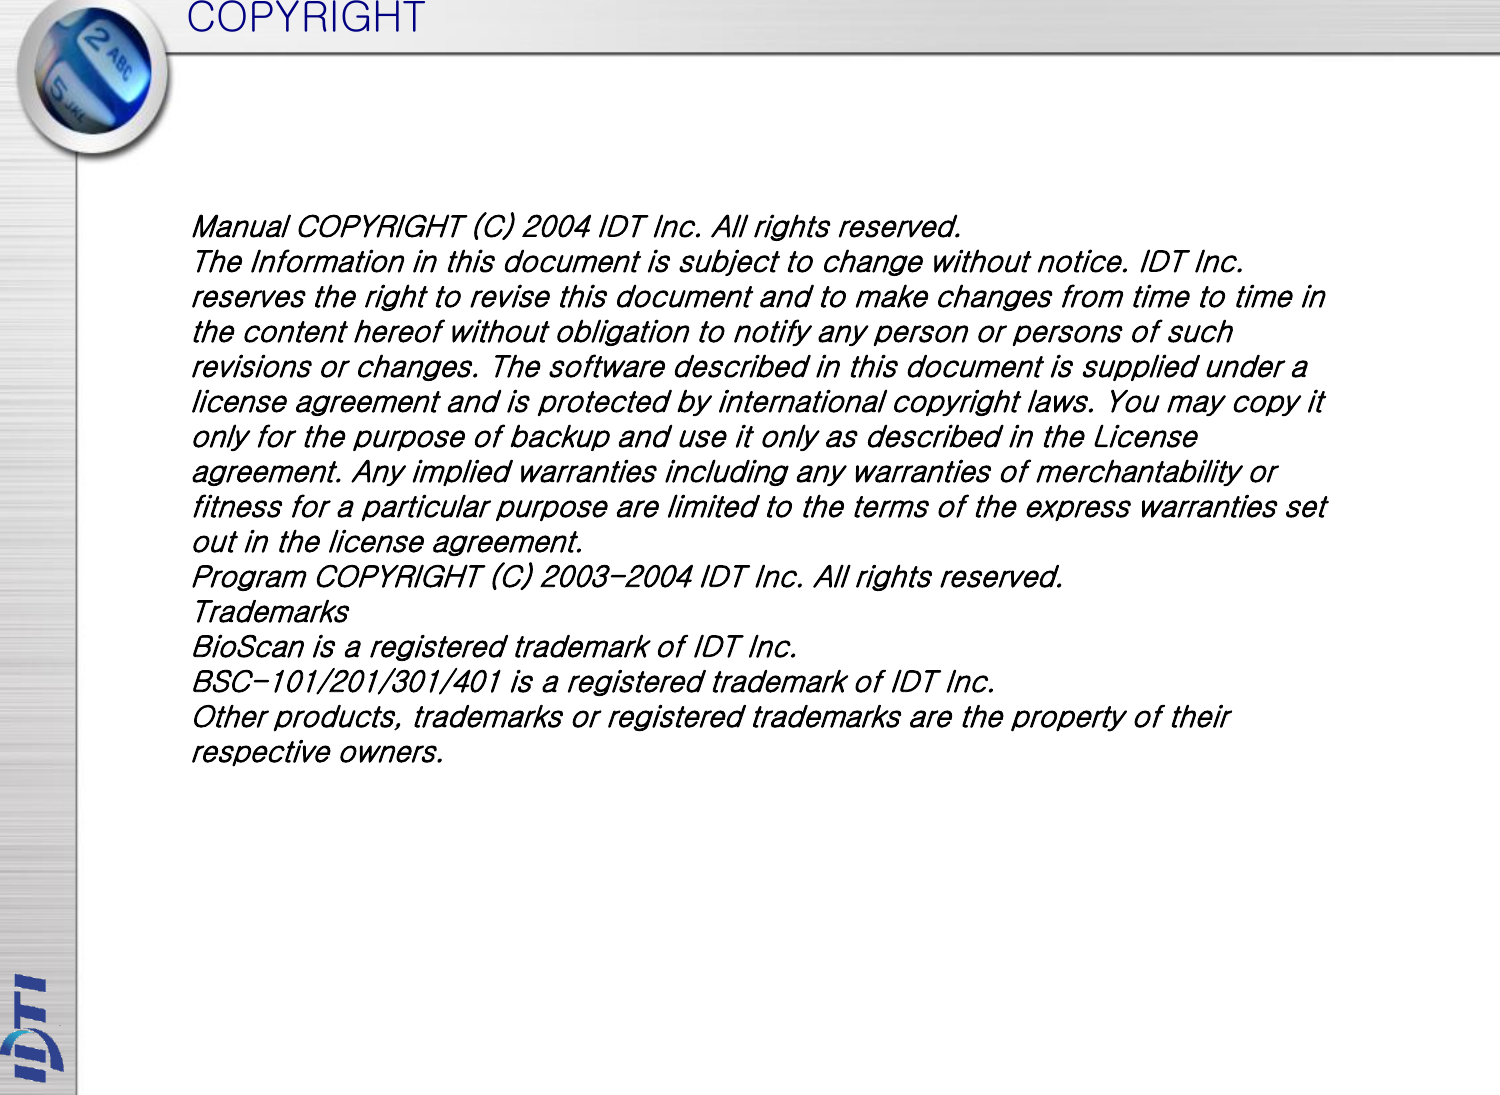 COPYRIGHT Manual COPYRIGHT (C) 2004 IDT Inc. All rights reserved. The Information in this document is subject to change without notice. IDT Inc. reserves the right to revise this document and to make changes from time to time in the content hereof without obligation to notify any person or persons of such revisions or changes. The software described in this document is supplied under a license agreement and is protected by international copyright laws. You may copy it only for the purpose of backup and use it only as described in the License agreement. Any implied warranties including any warranties of merchantability or fitness for a particular purpose are limited to the terms of the express warranties set out in the license agreement. Program COPYRIGHT (C) 2003-2004 IDT Inc. All rights reserved. Trademarks BioScan is a registered trademark of IDT Inc. BSC-101/201/301/401 is a registered trademark of IDT Inc. Other products, trademarks or registered trademarks are the property of their respective owners. 